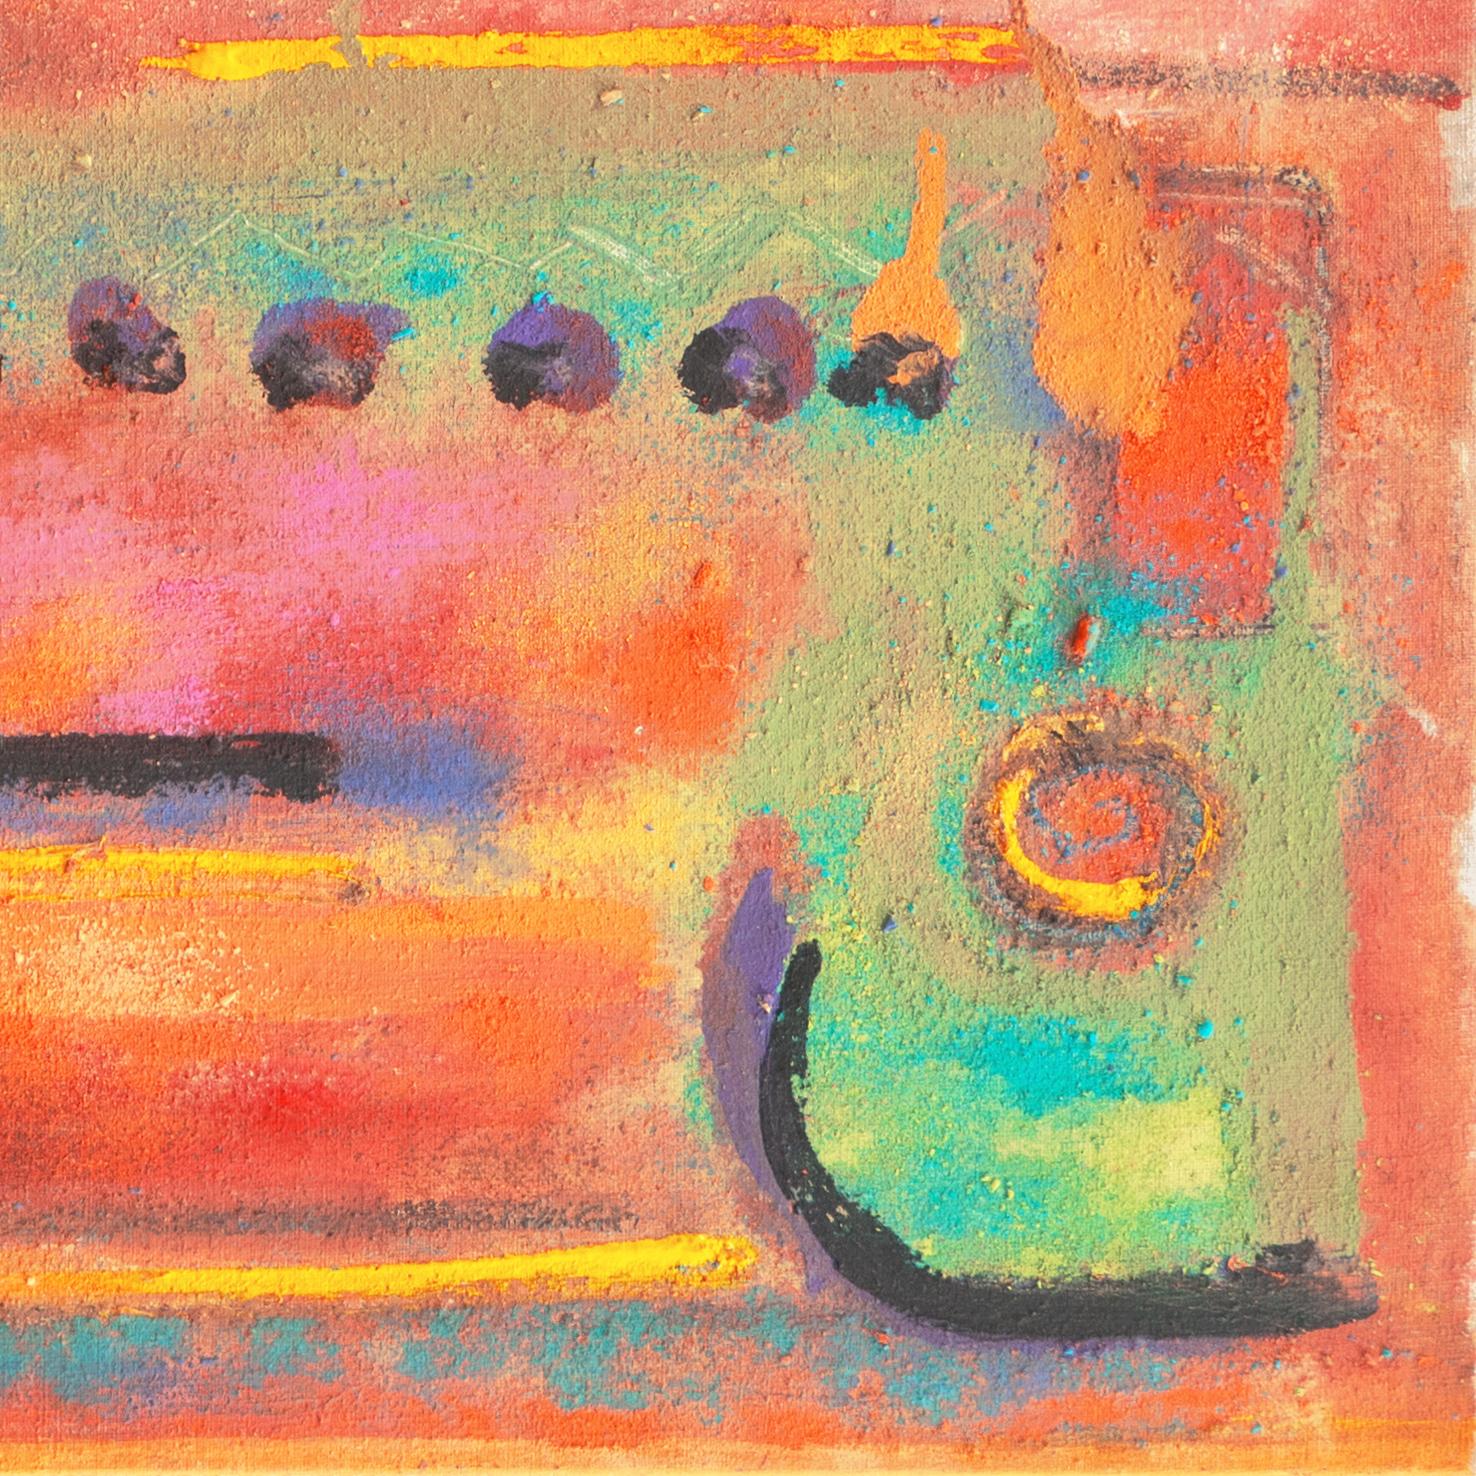 'Abstraction in Coral, Aqua and Gold', 1970's American School Abstract Oil - Orange Abstract Painting by 20th century American School